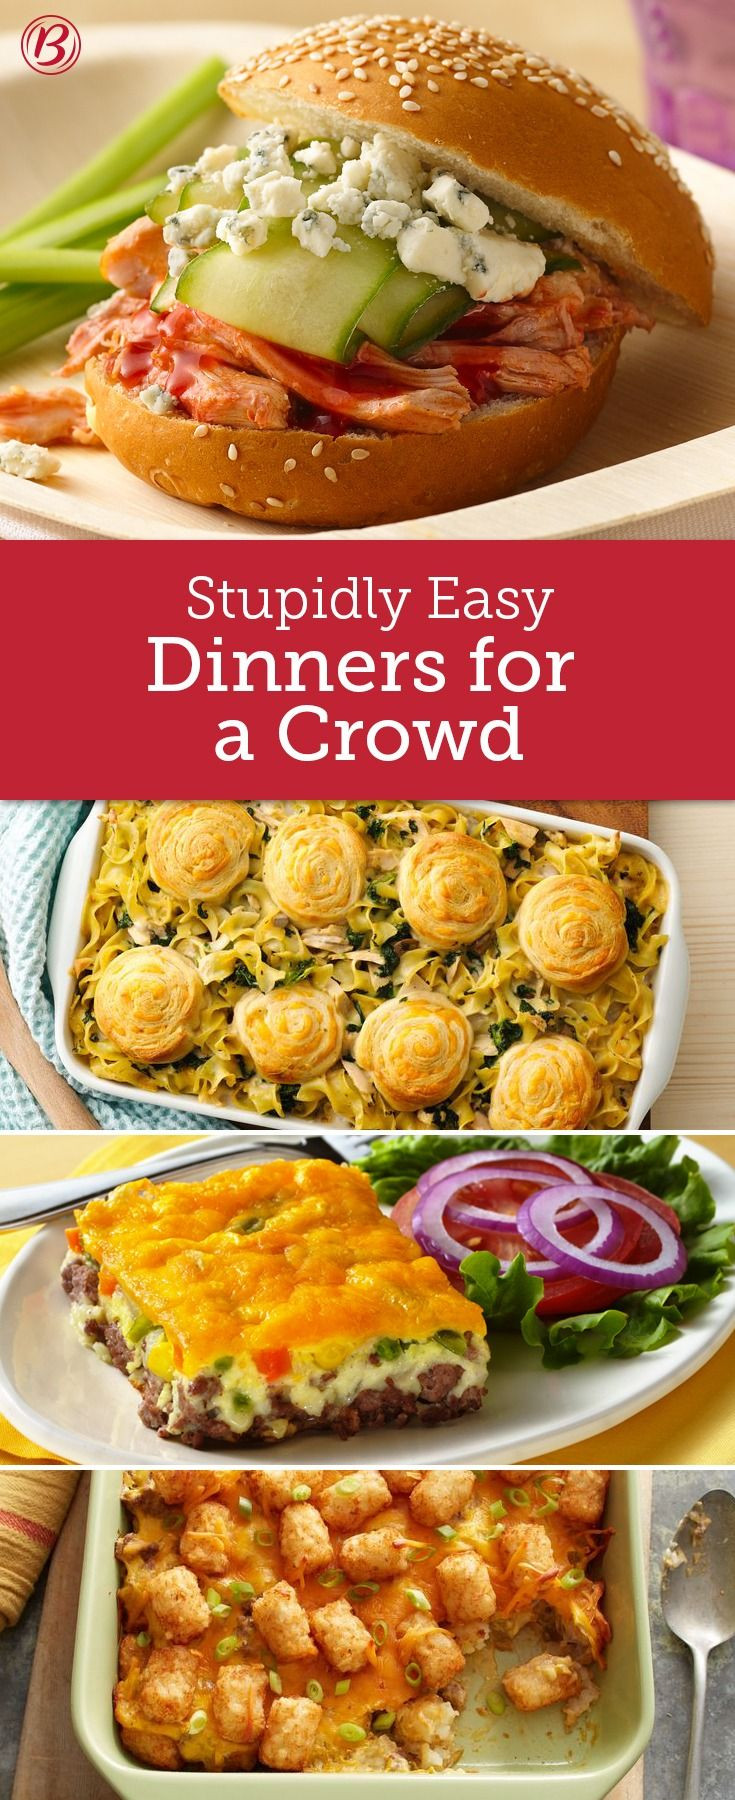 Dinner Ideas For A Crowd
 Easy Crowd Size Dinners